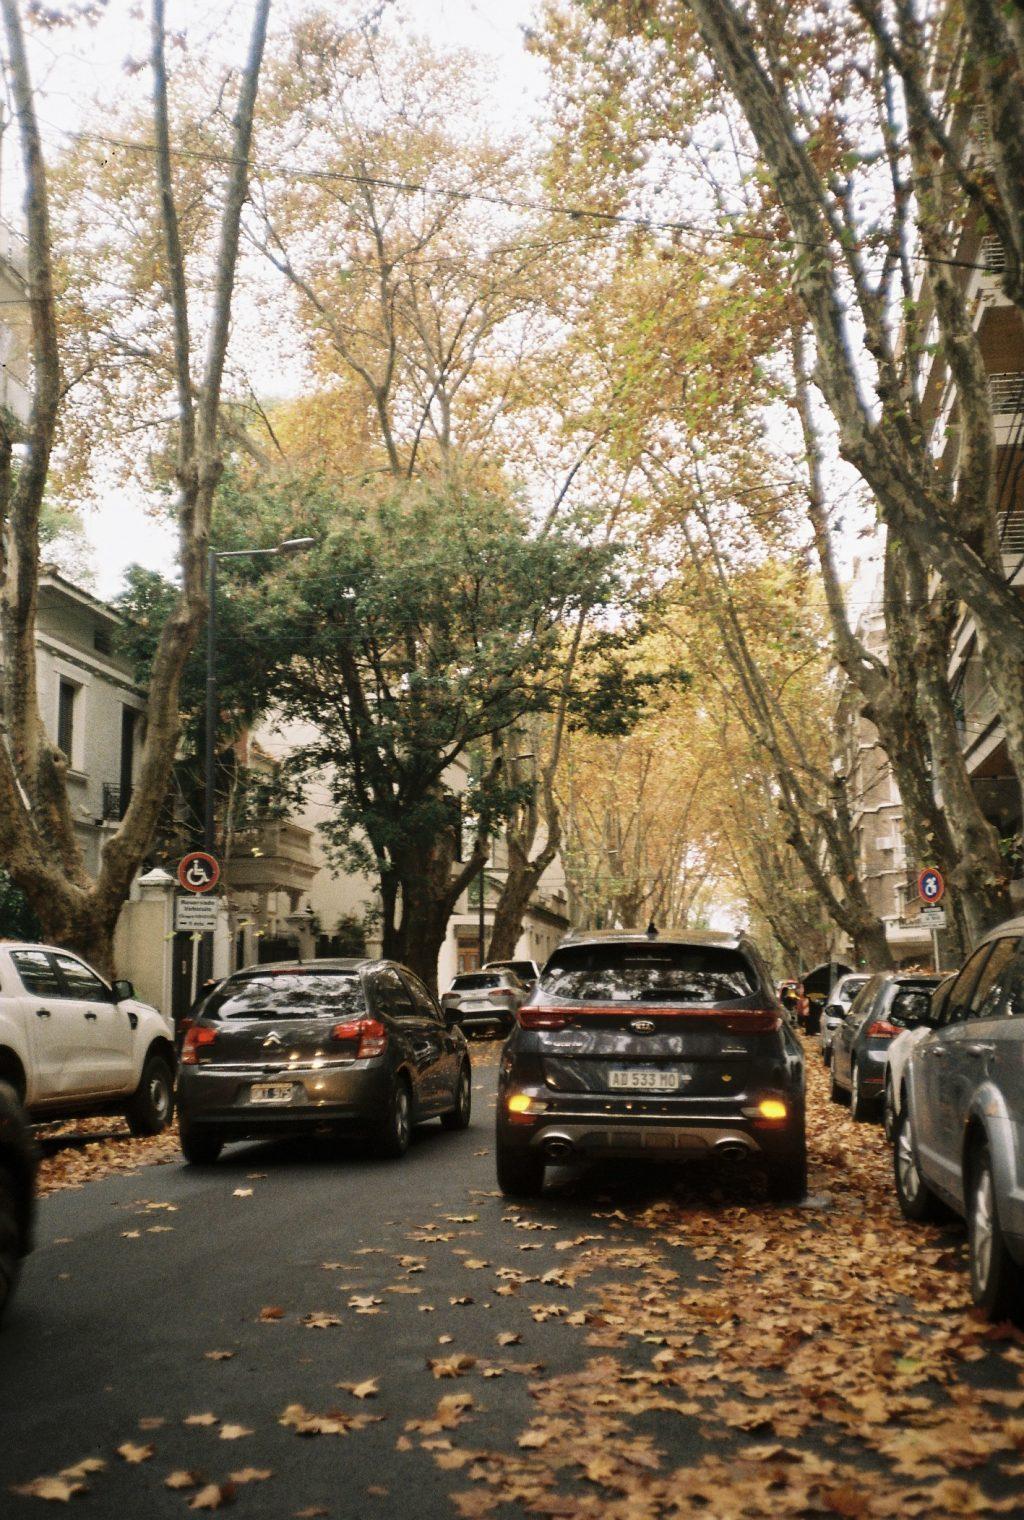 As autumn came to a close and winter came in, the auburn leaves of trees fell onto the streets. As someone from California, I barely experience fall, so this was everything to me.